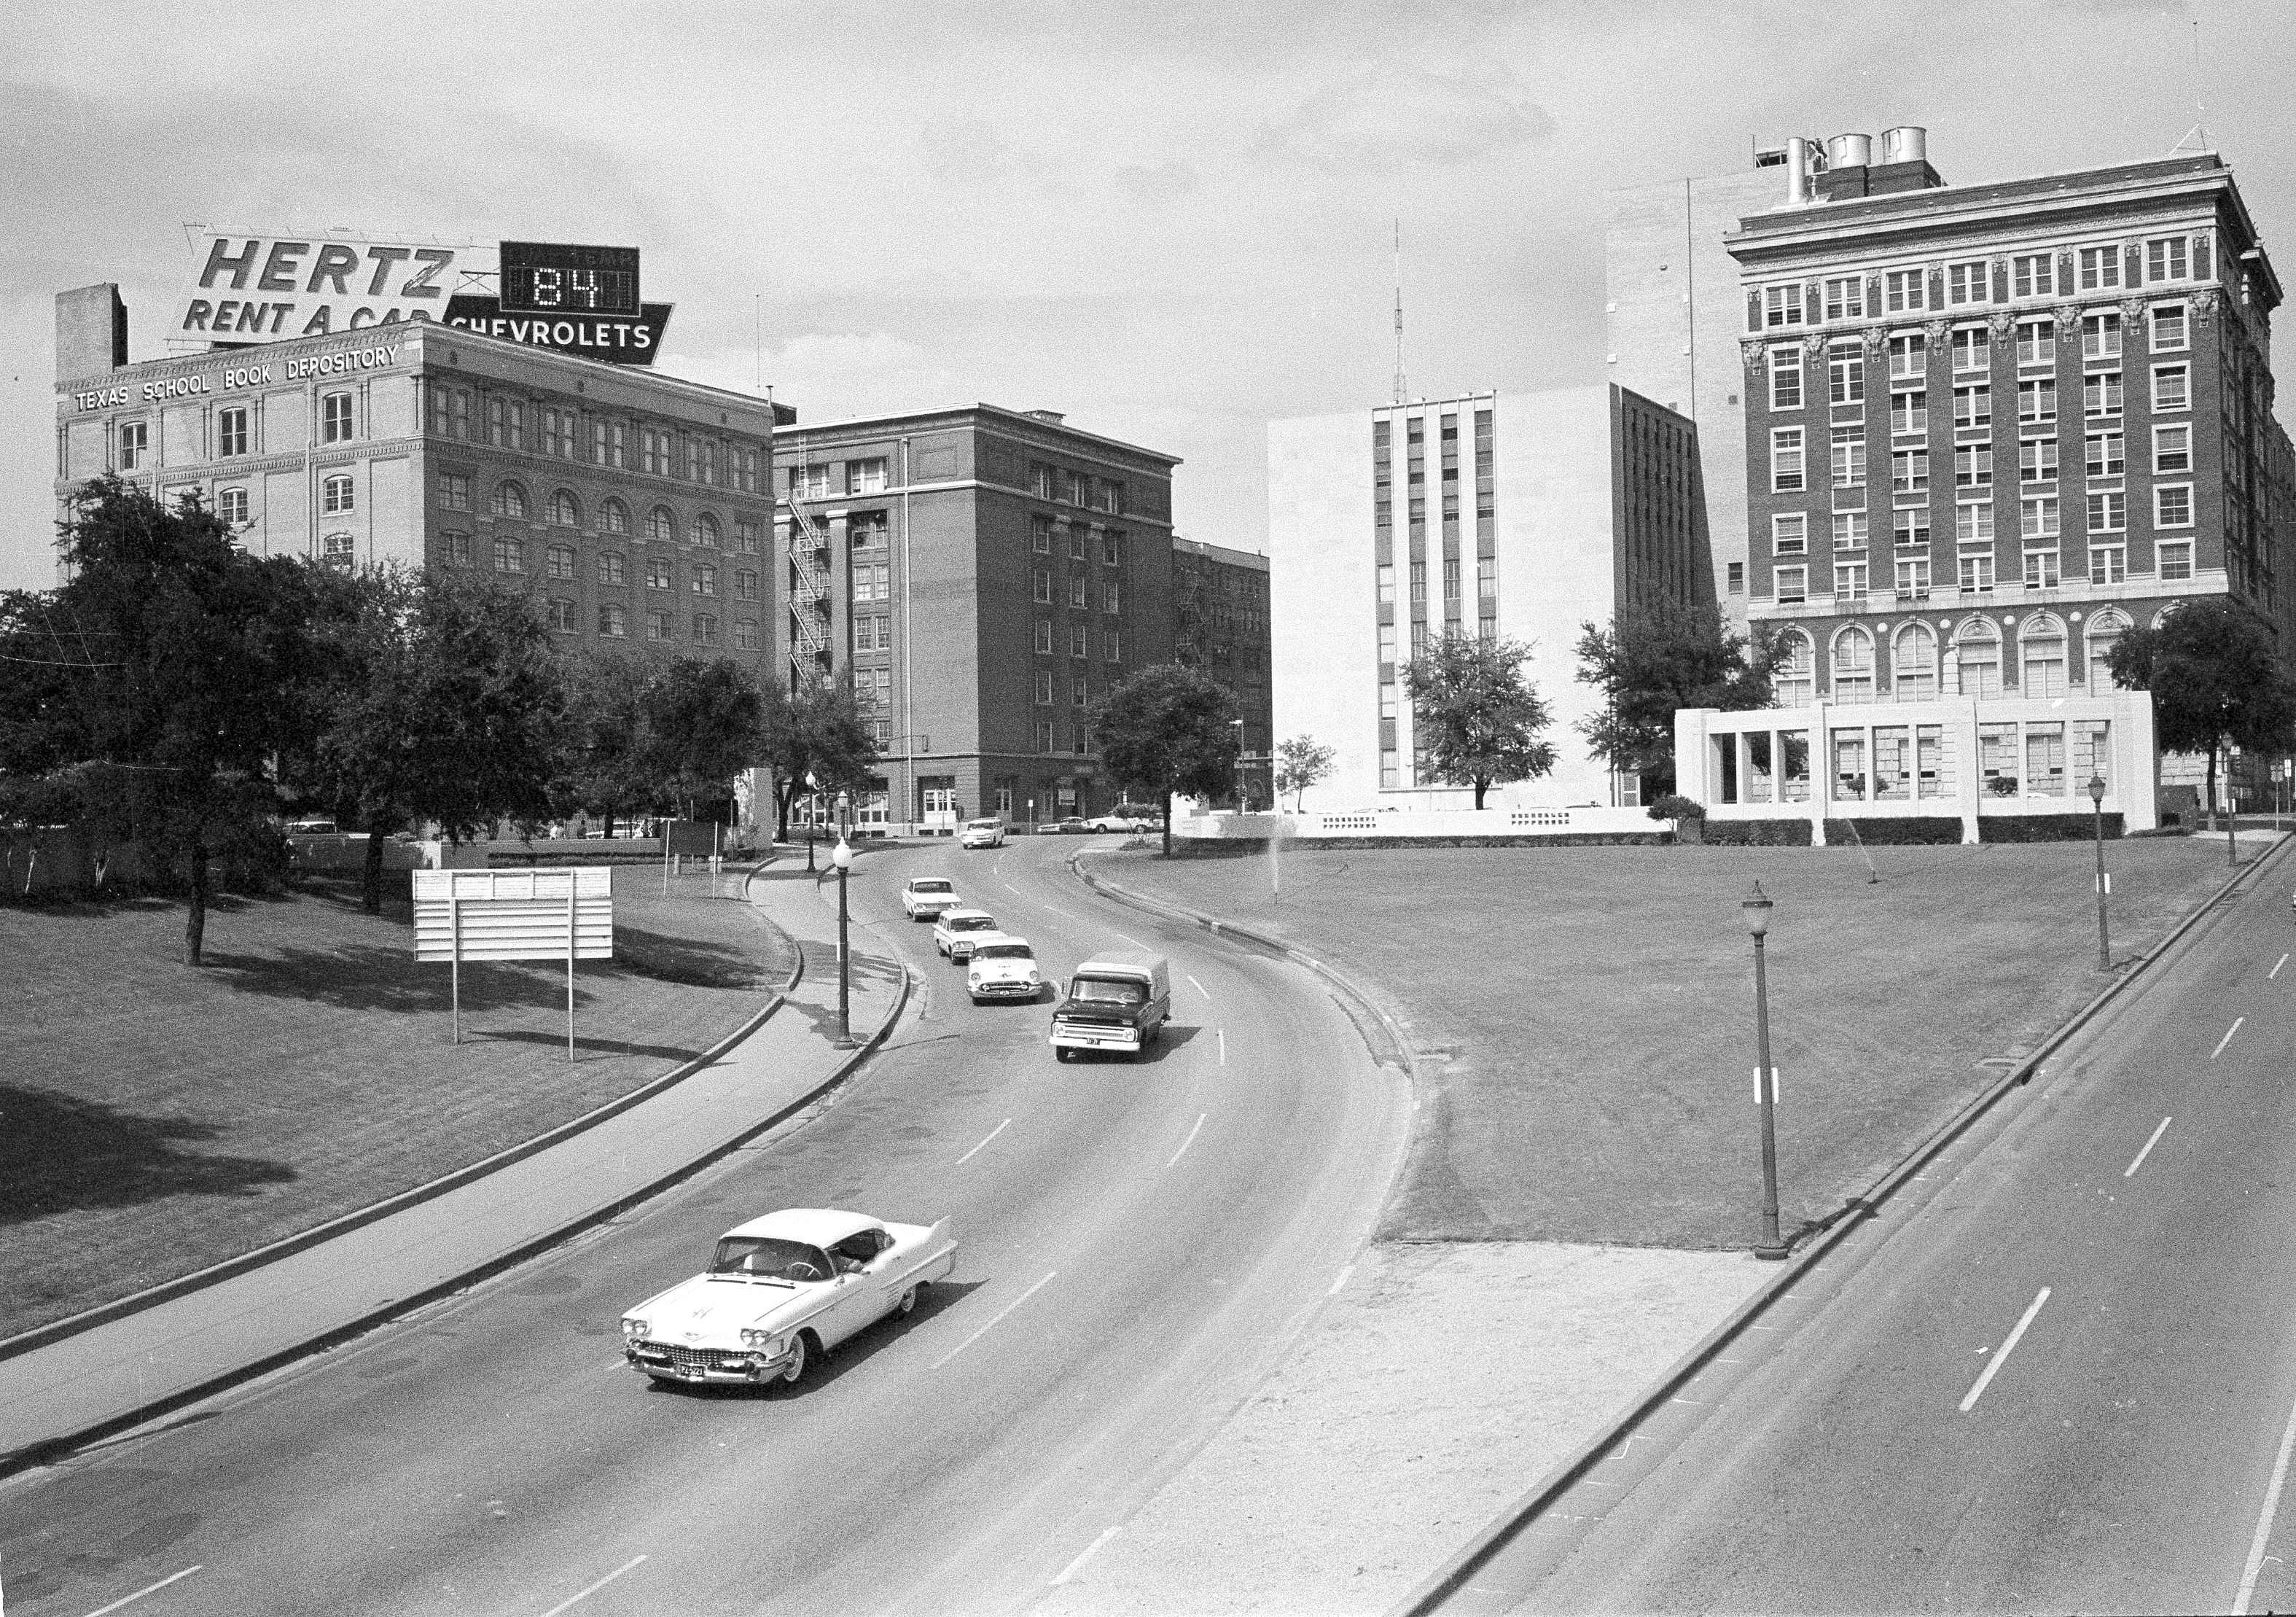 FILE - This May 22, 1964 photo shows Dealey Plaza where U.S. President John F. Kennedy traveled down when shots claimed his life. The building at left is the Texas School Book Depository Building where Lee Harvery Oswald was determined to have fired the shots. (AP Photo/File)